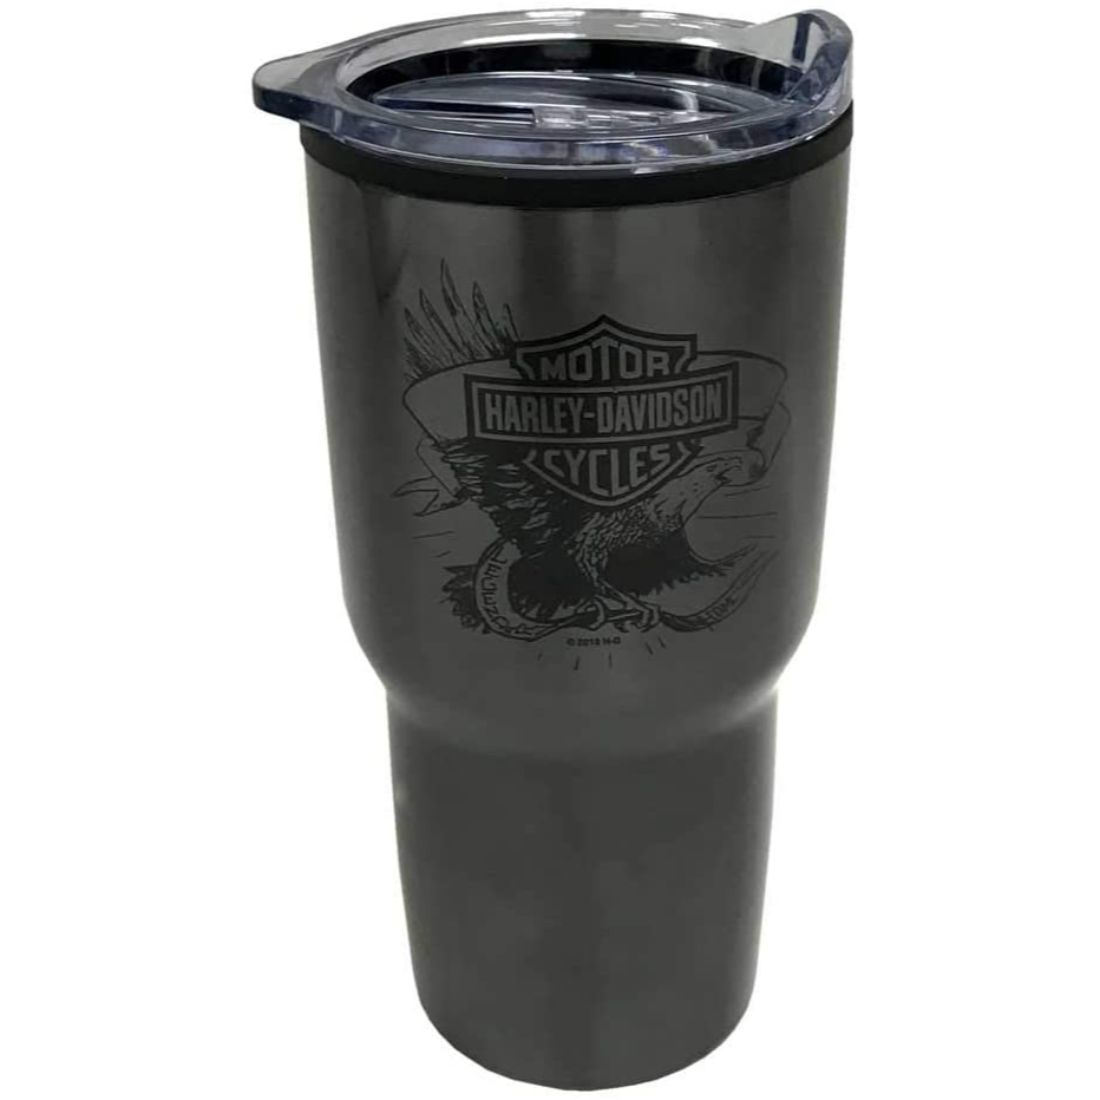 Harley Davidson Legendary Eagle Stainless Steel Cup